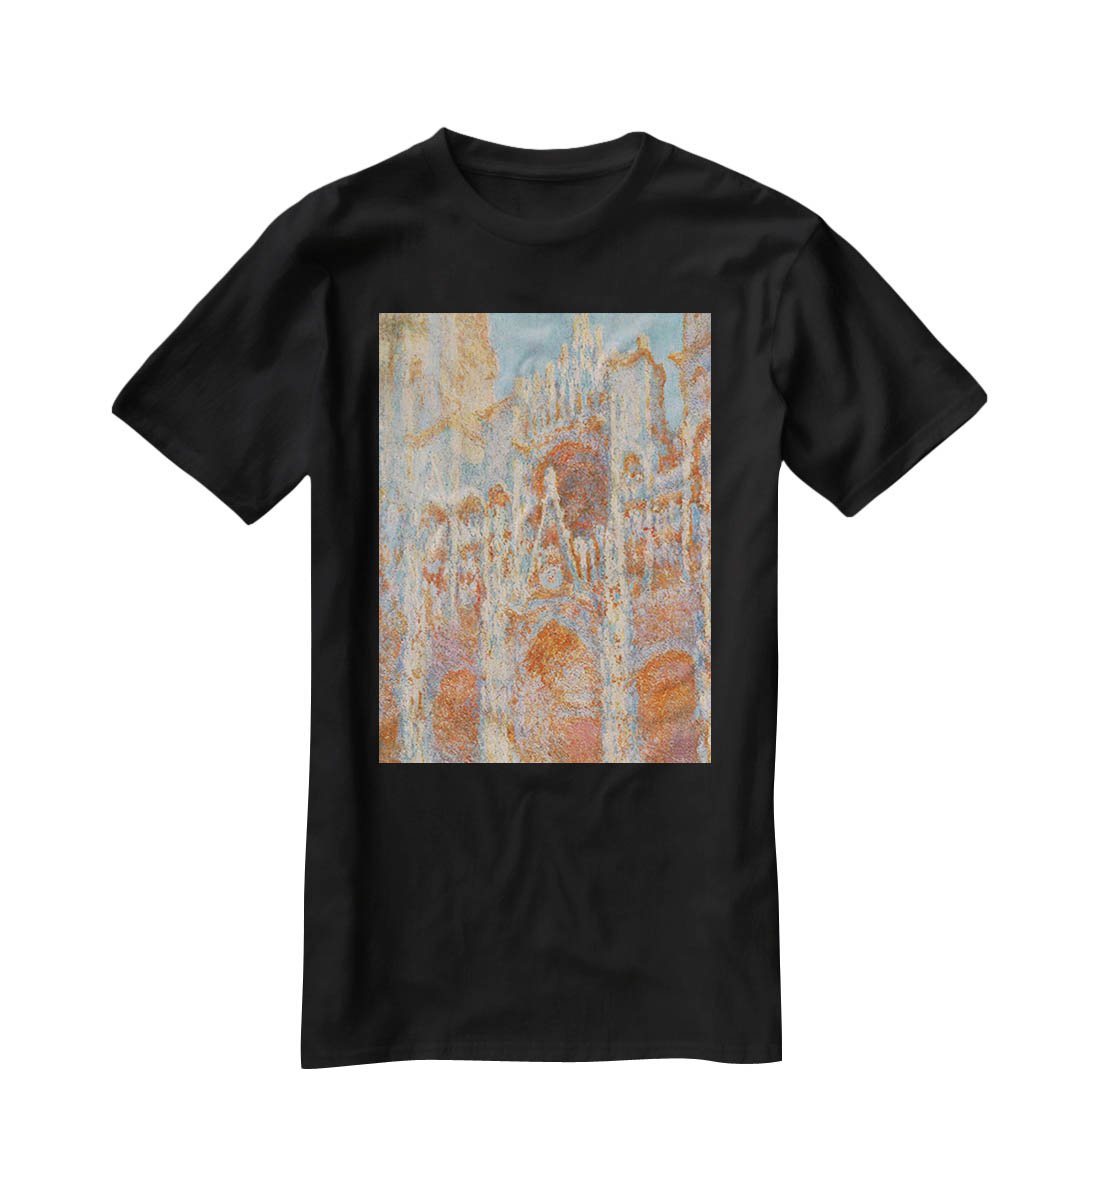 The Rouen Cathedral The facade at sunset by Monet T-Shirt - Canvas Art Rocks - 1